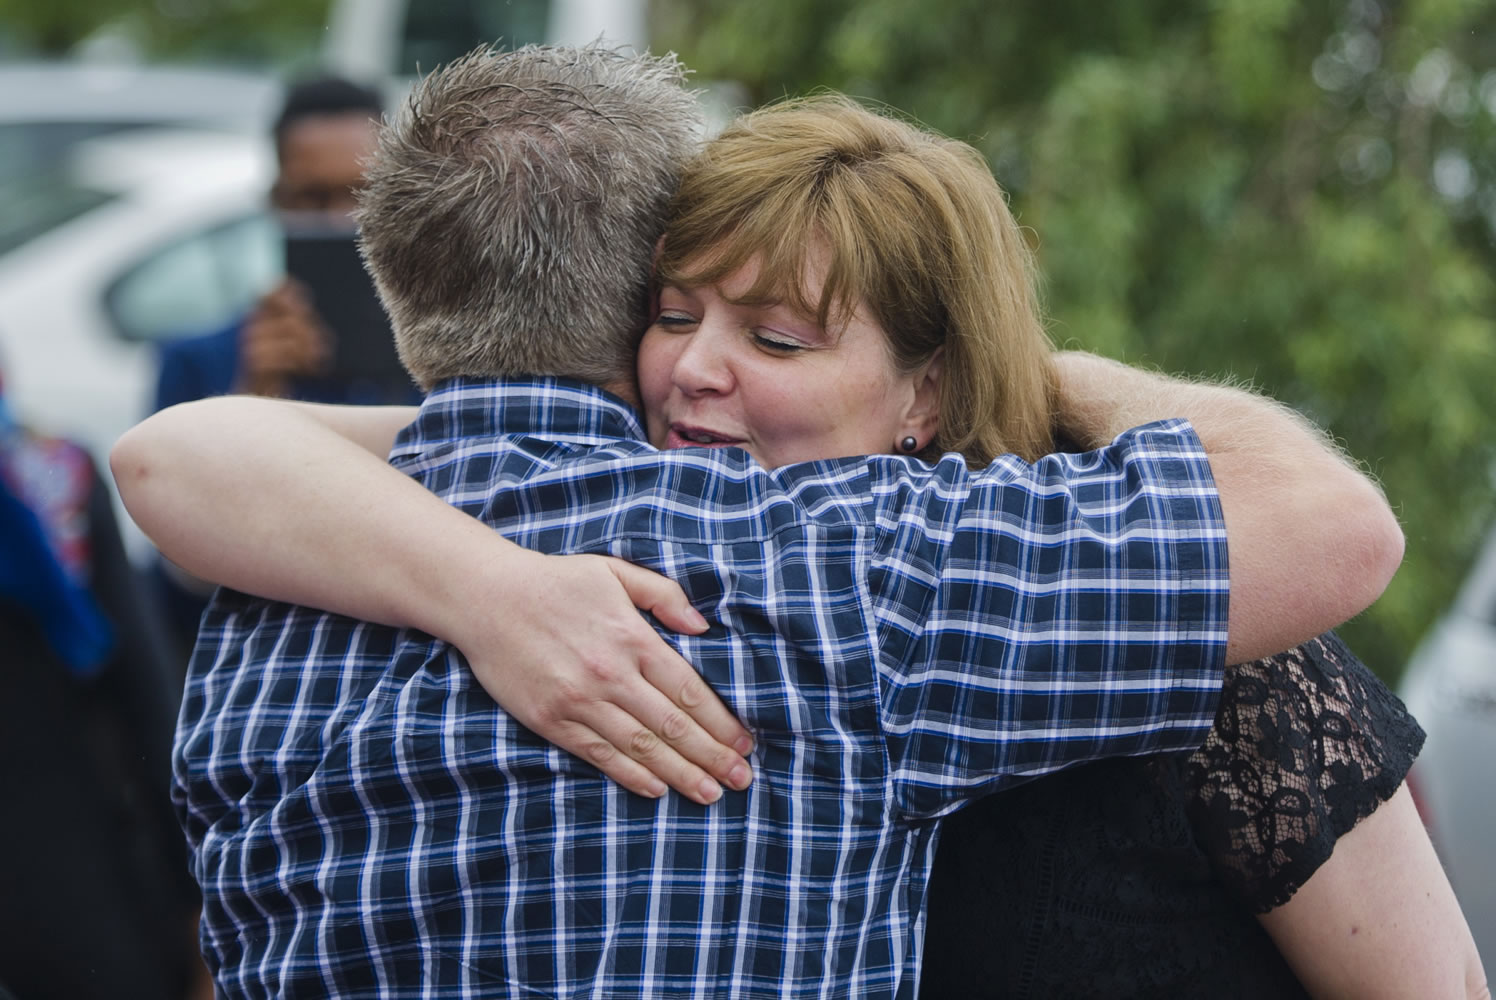 Associated Press
Hannelie Groenewald, the wife of slain aid worker Werner Groenewald, is comforted Friday after a memorial service in Pretoria, South Africa. Werner Groenewald and his teenage children were killed Nov. 29 in Kabul, Afghanistan.